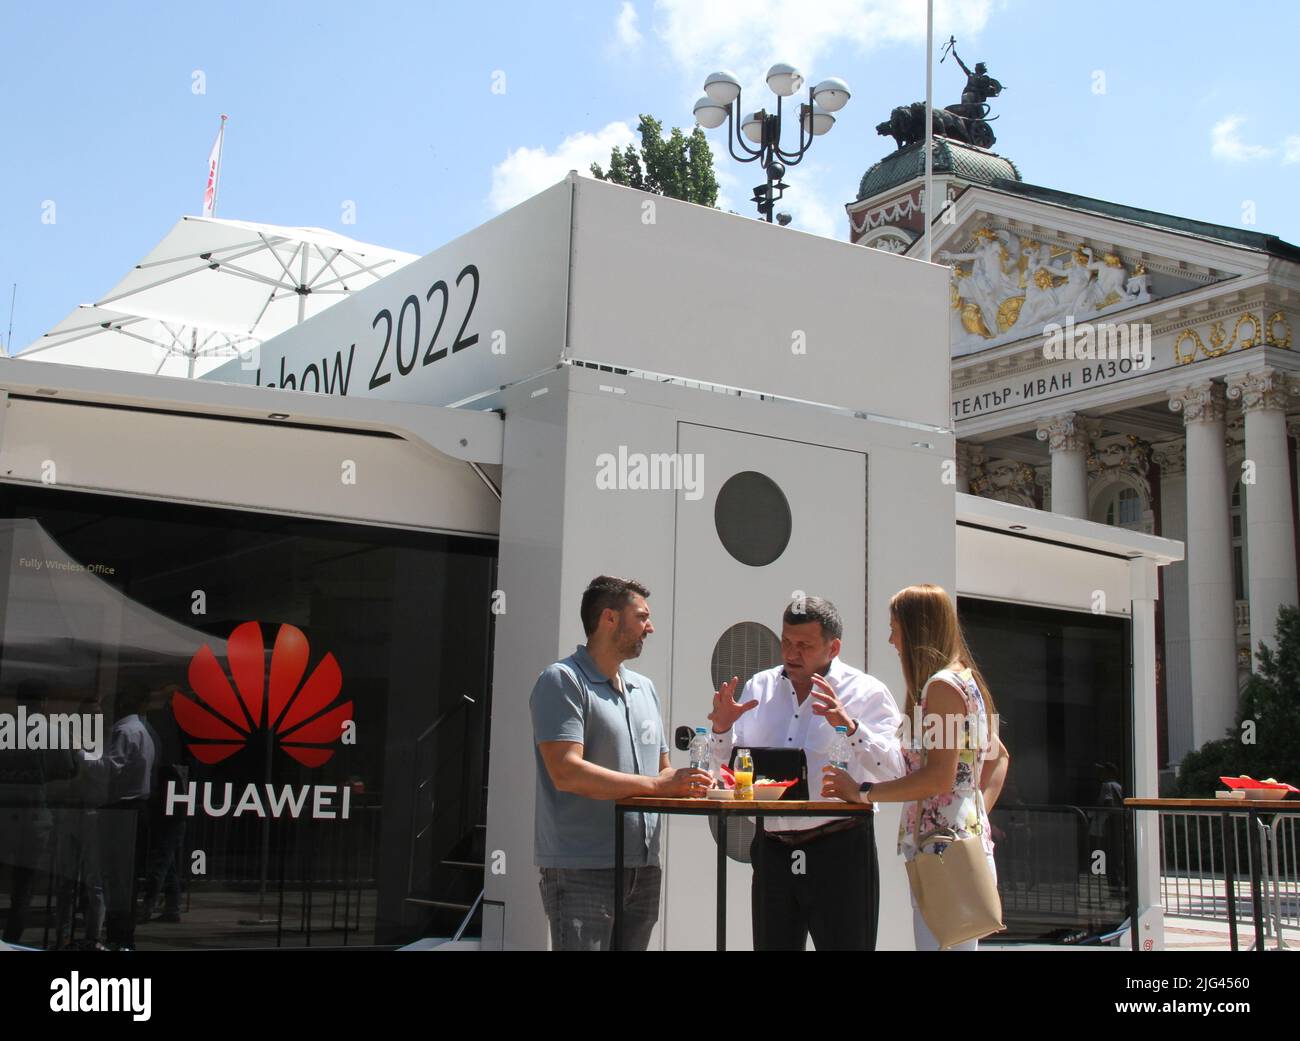 220707) -- SOFIA, July 7, 2022 (Xinhua) -- People talk during Huawei  Enterprise ICT Roadshow 2022 in Sofia, Bulgaria, July 7, 2022. Huawei, a  Chinese tech giant in information and communication technology (